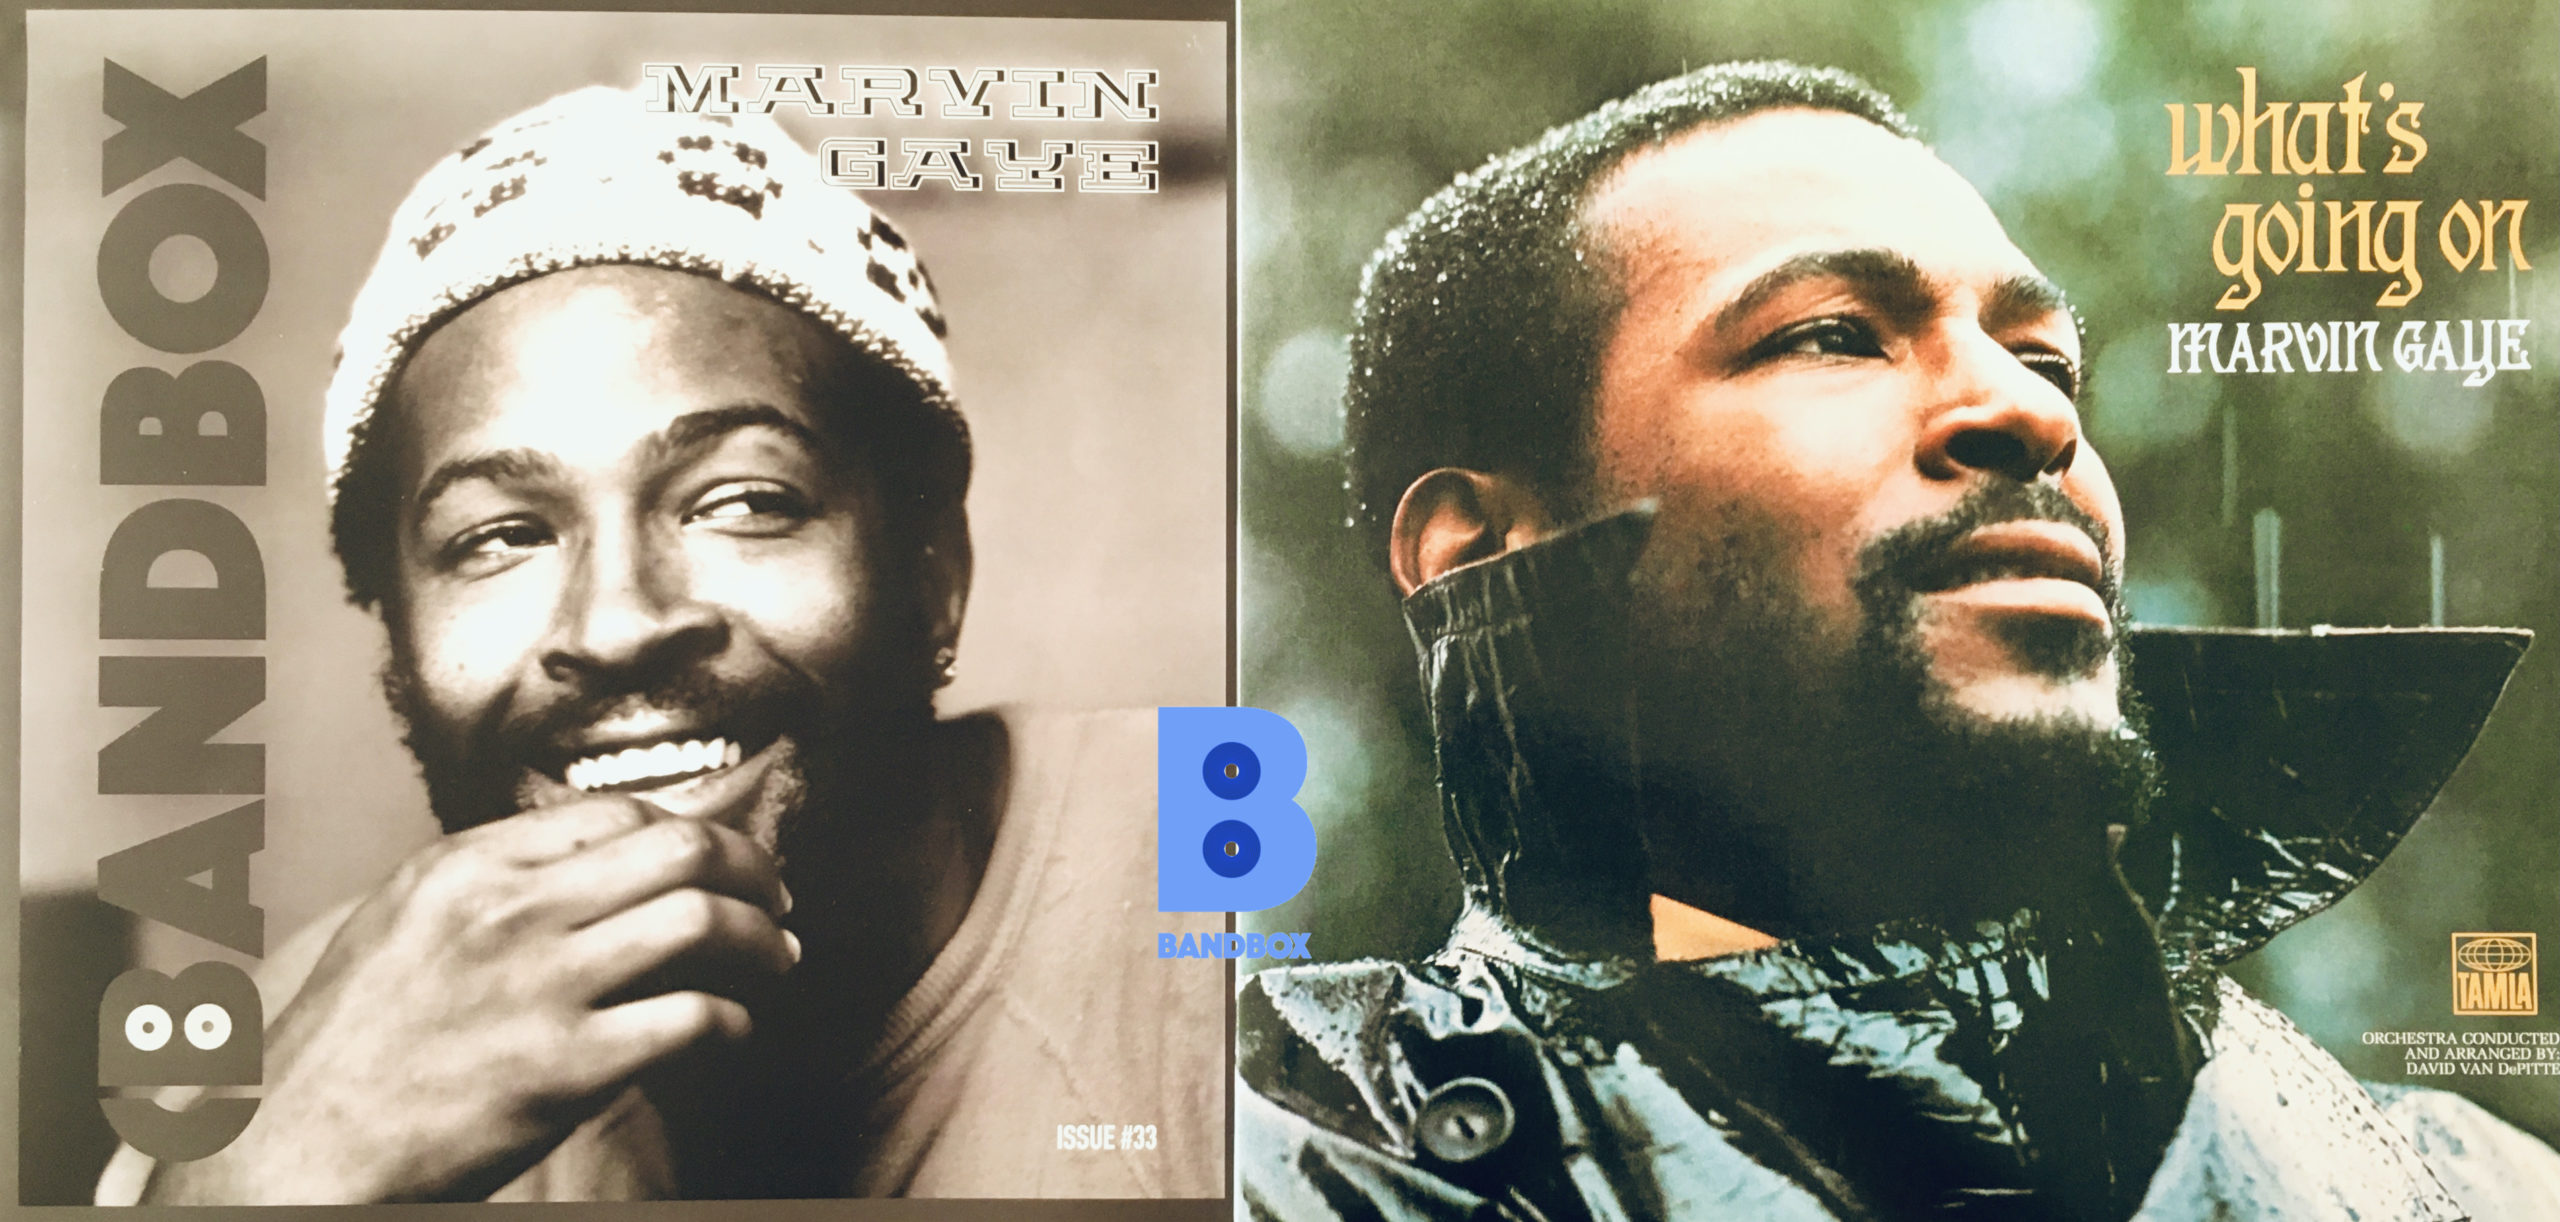 Geek insider, geekinsider, geekinsider. Com,, bandbox unboxed vol. 20 - marvin gaye, entertainment